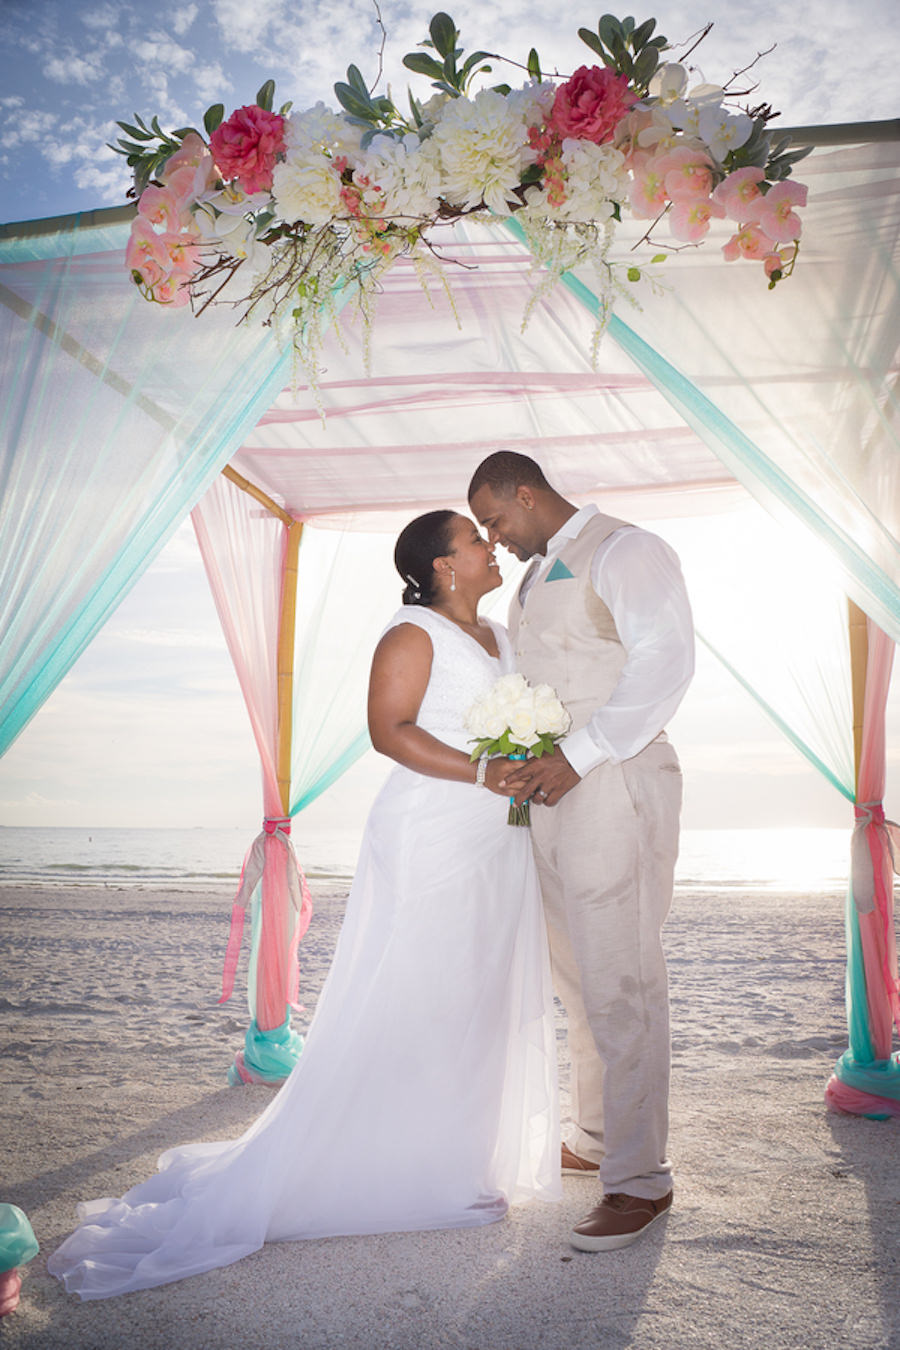 Pass-a-Grille, Waterfront Bride and Groom Beach Wedding Portrait Under Bamboo Wedding Altar with Pink and White Flowers | St. Pete Beach Wedding Planners Tide the Knot Beach Weddings